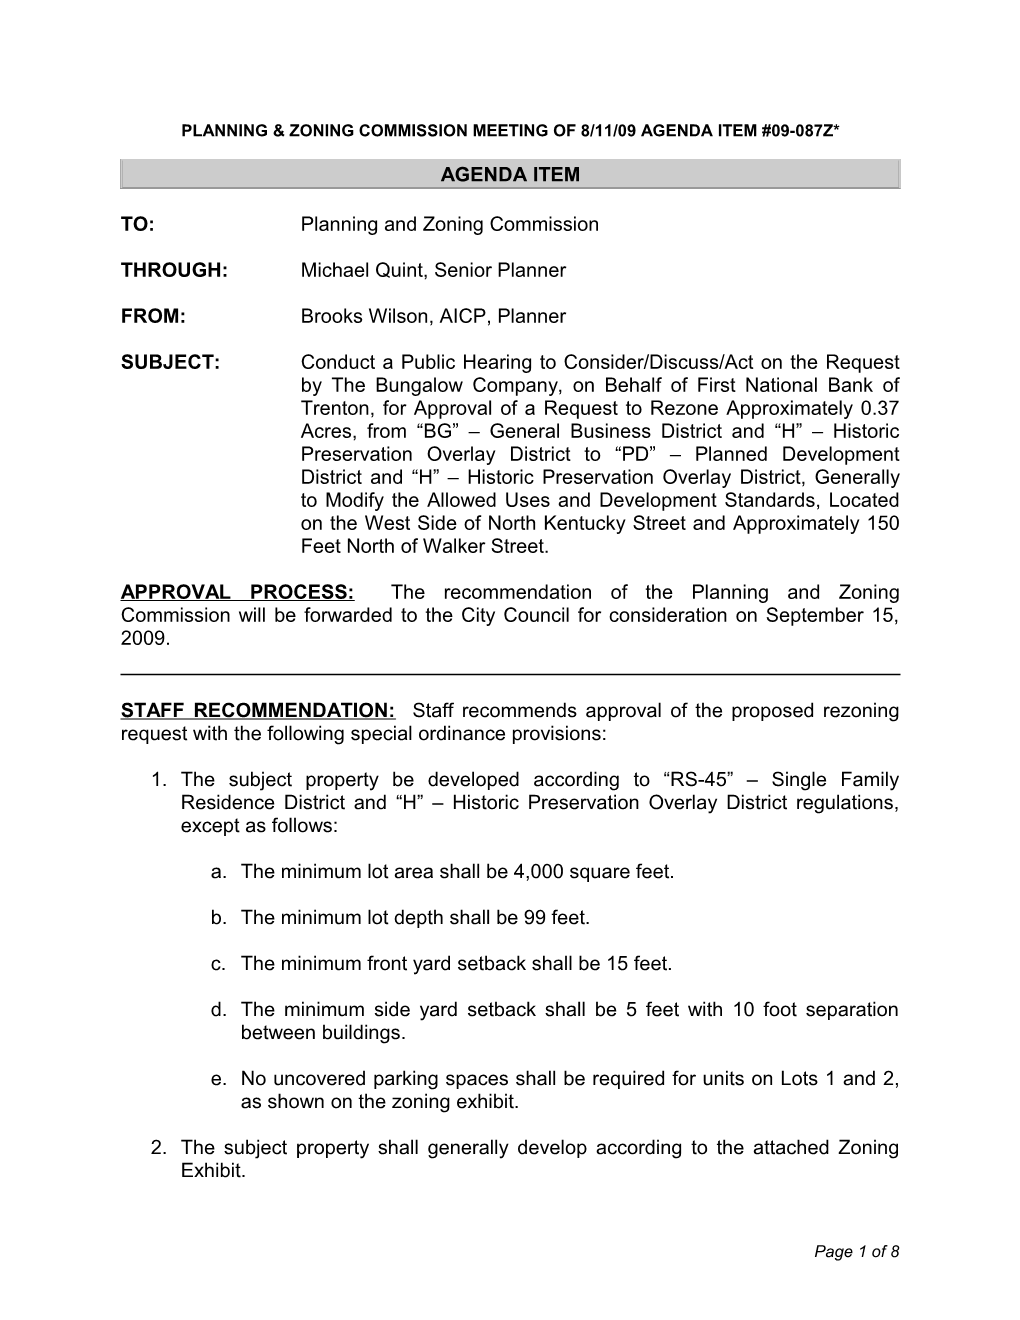 Planning & Zoning Commission Meeting of Month-Day-Year of Meeting Agenda Item #Item Number*